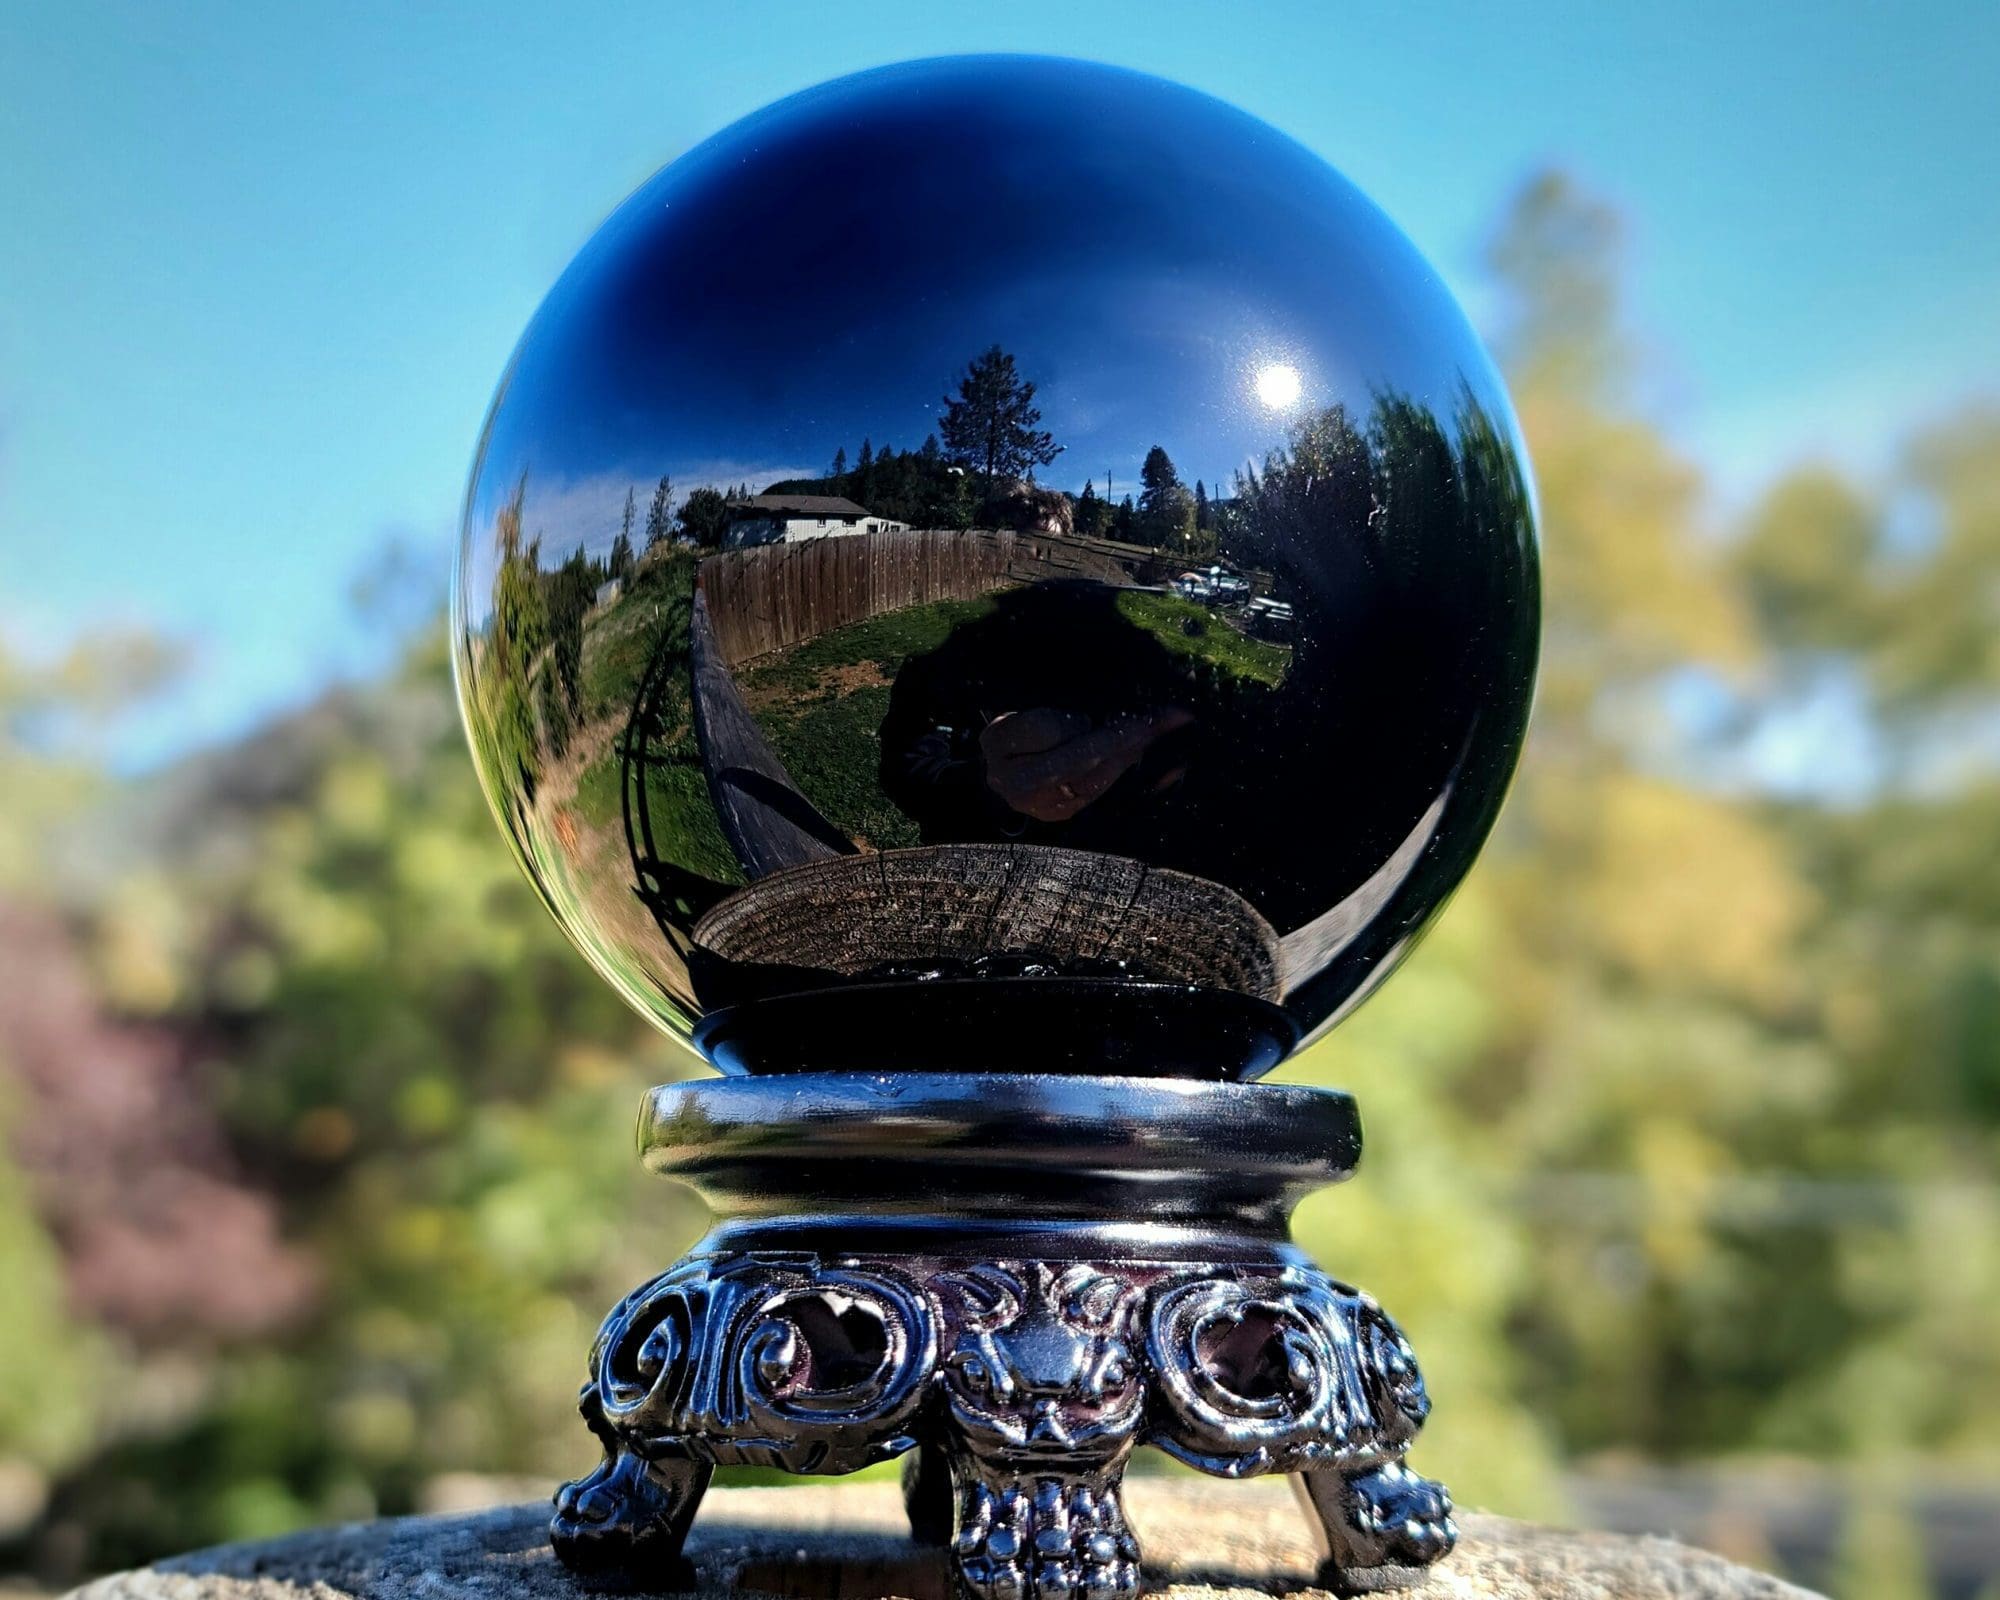 80mm Black Crystal Ball, Occult, Fortune Telling, Onyx Ball